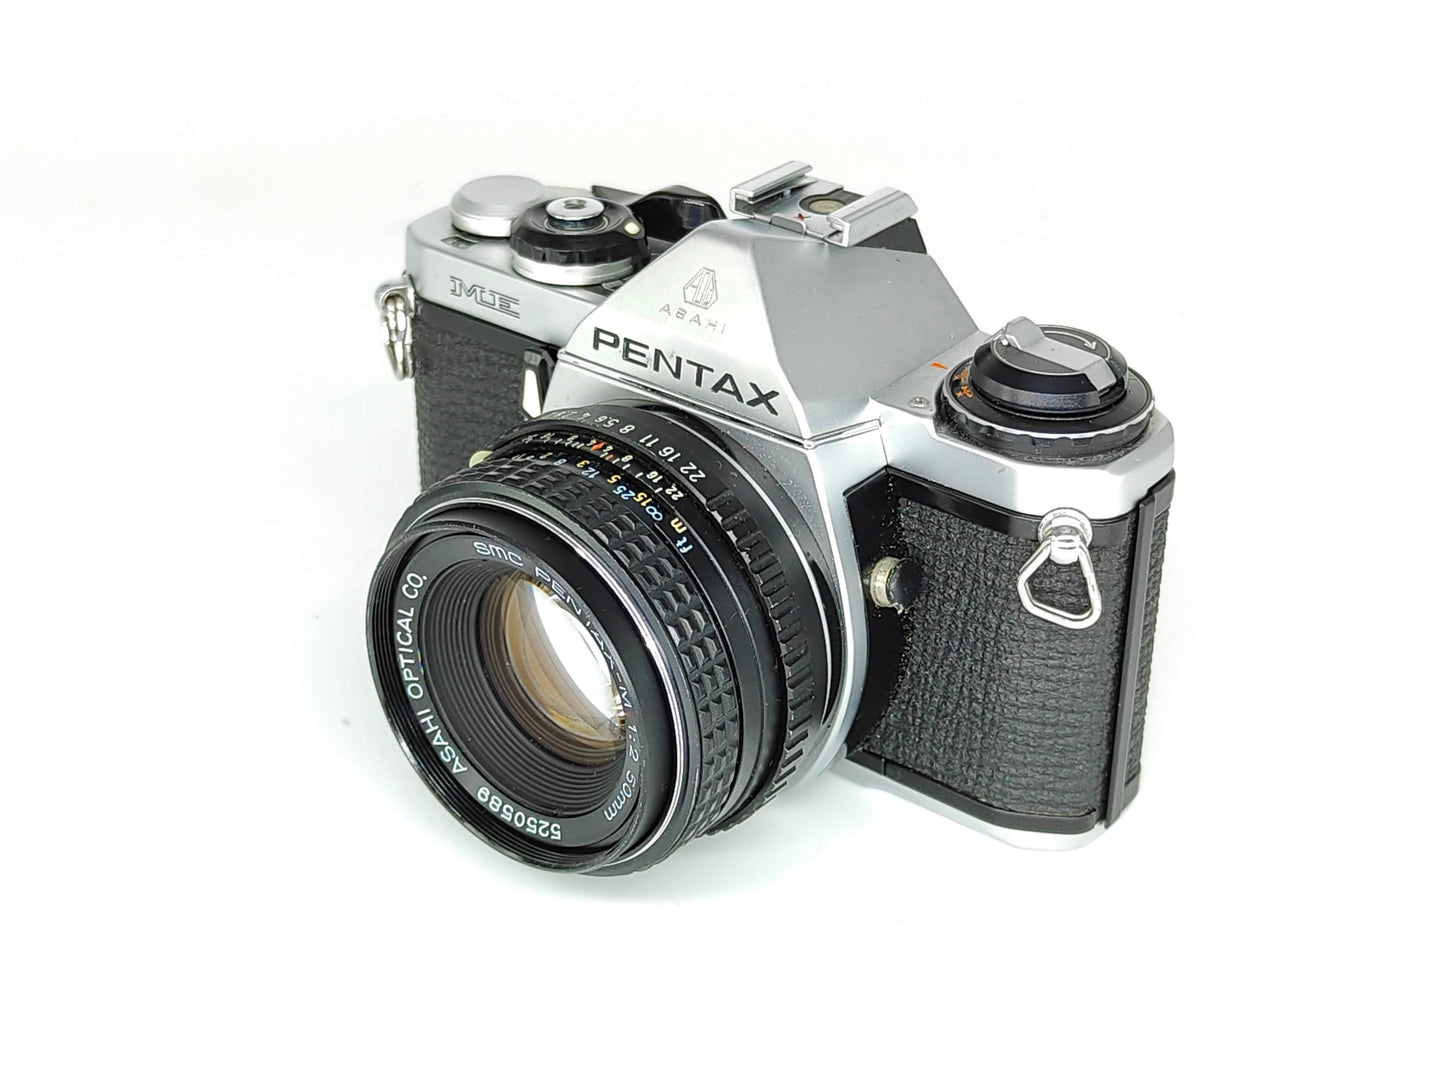 Pentax ME film camera with 50mm f/2.0 lens